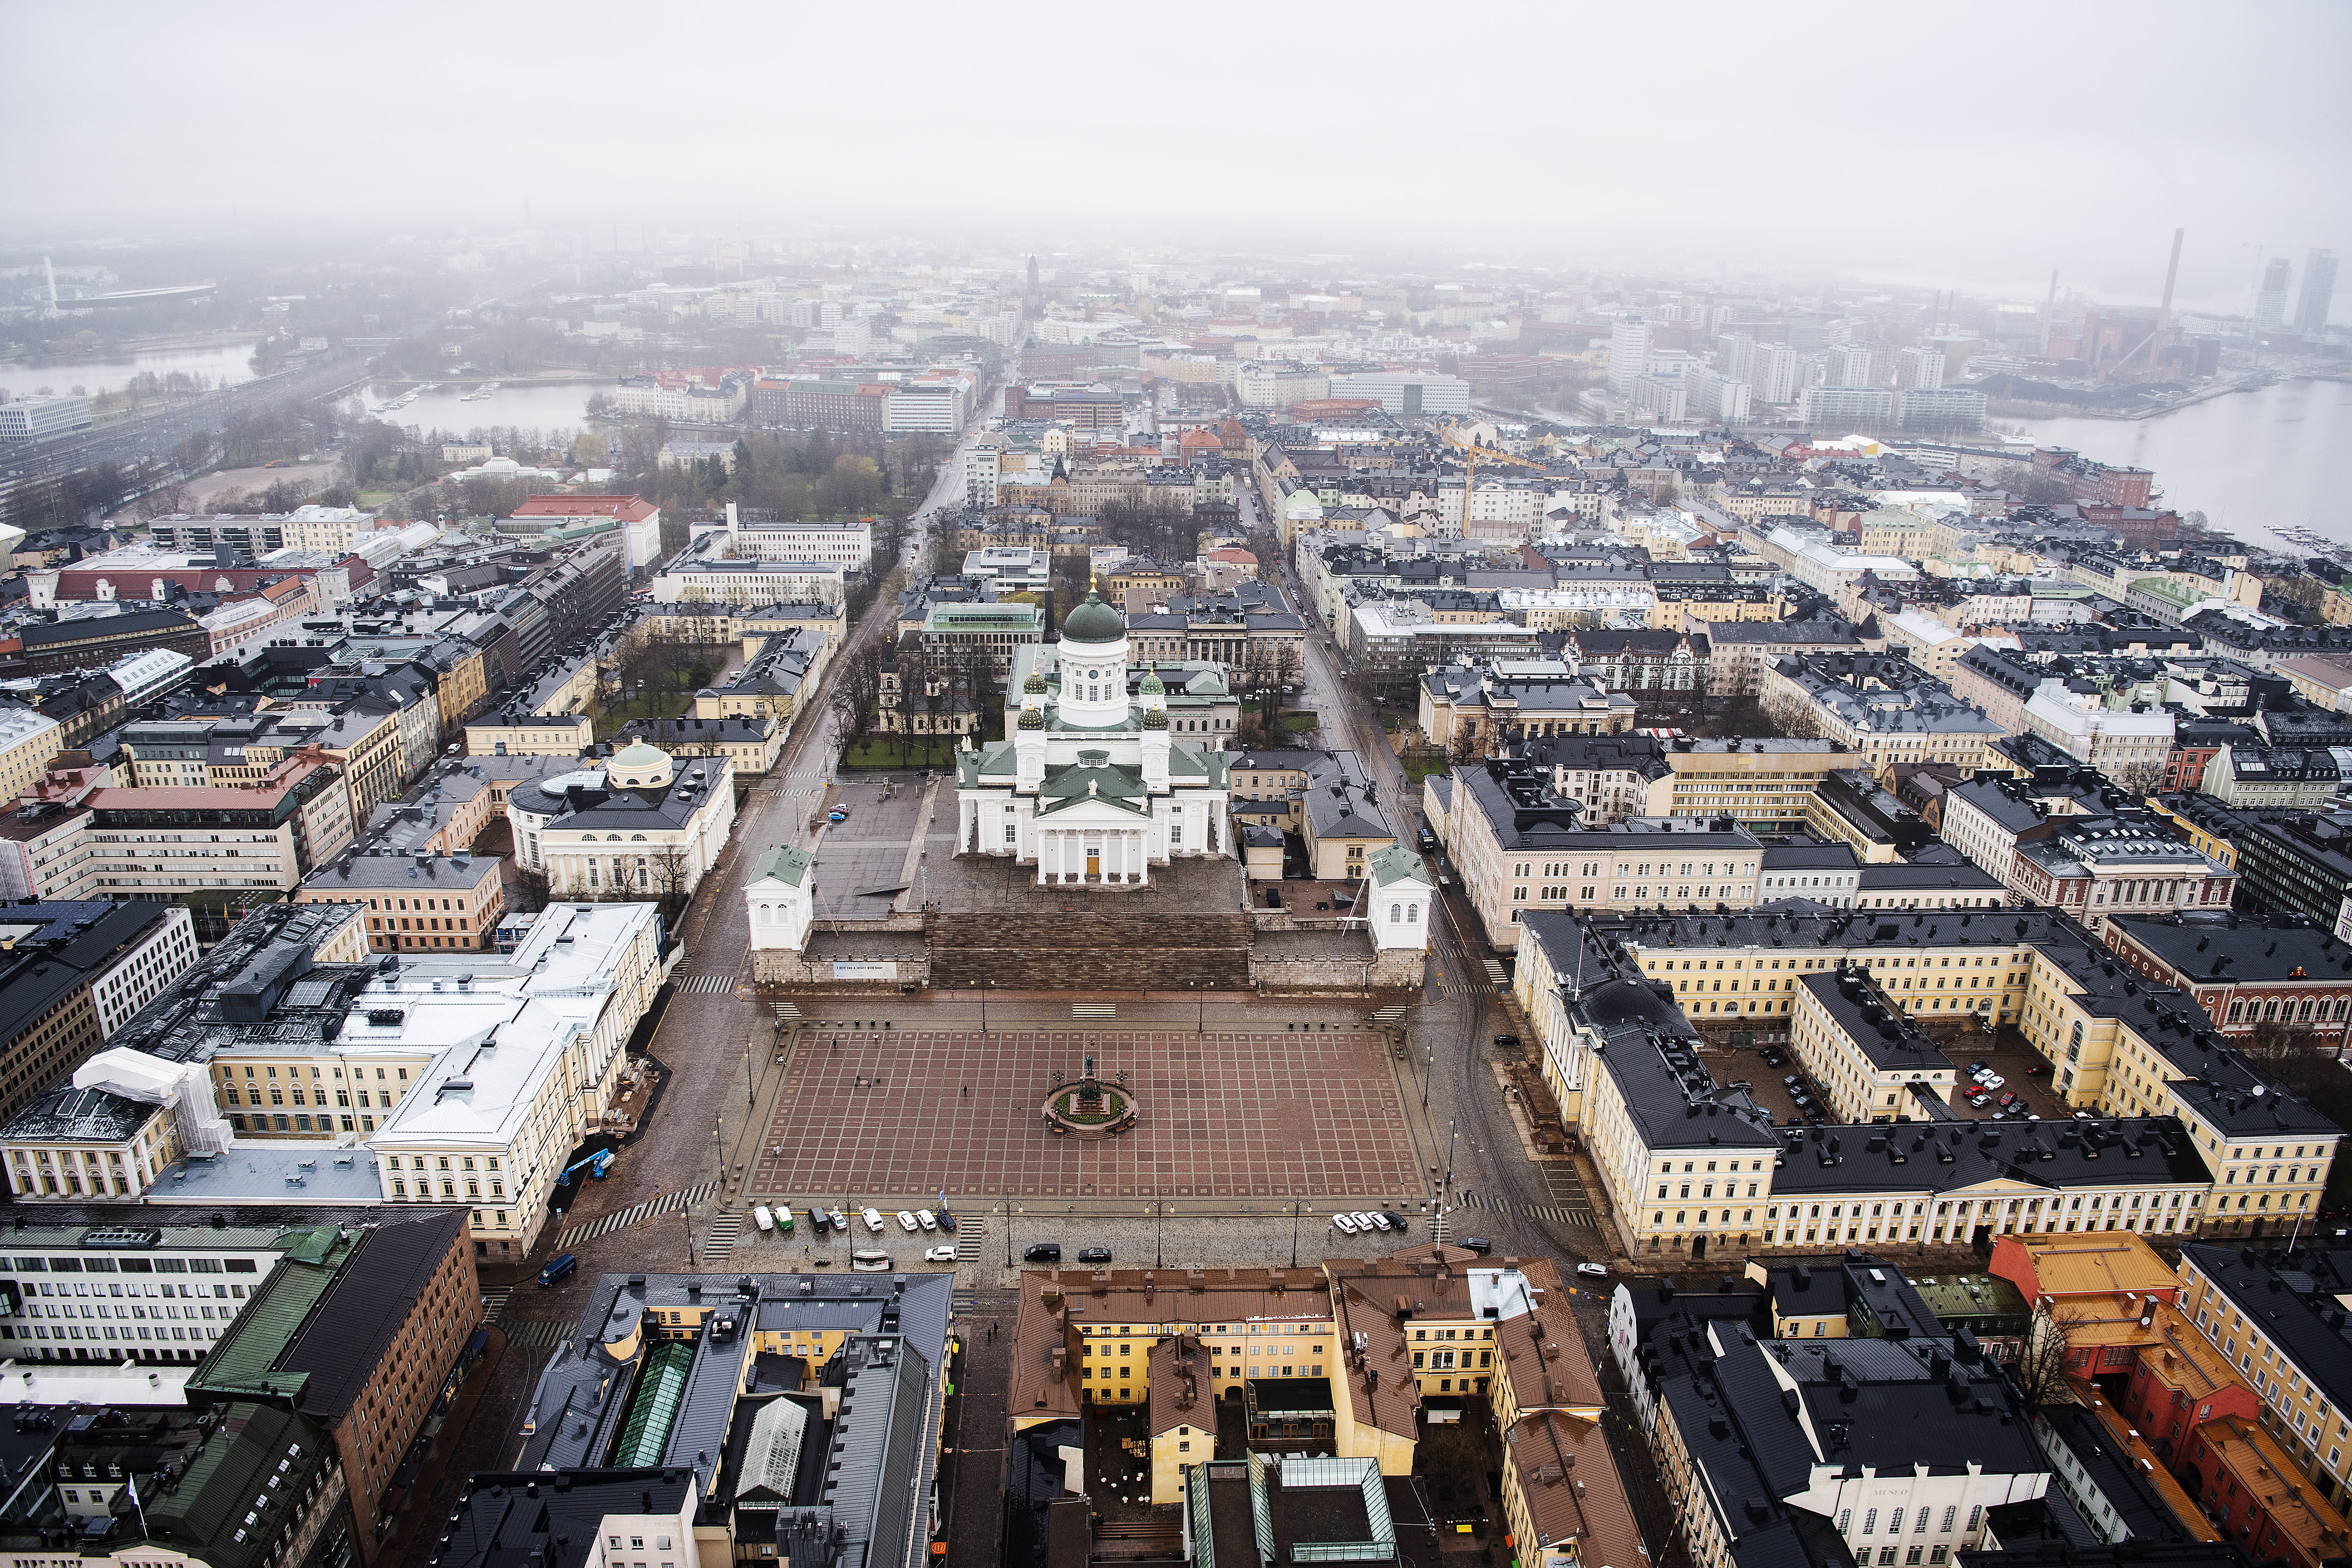 The Finnish and Swedish interior ministers will meet in Helsinki to discuss co-operation